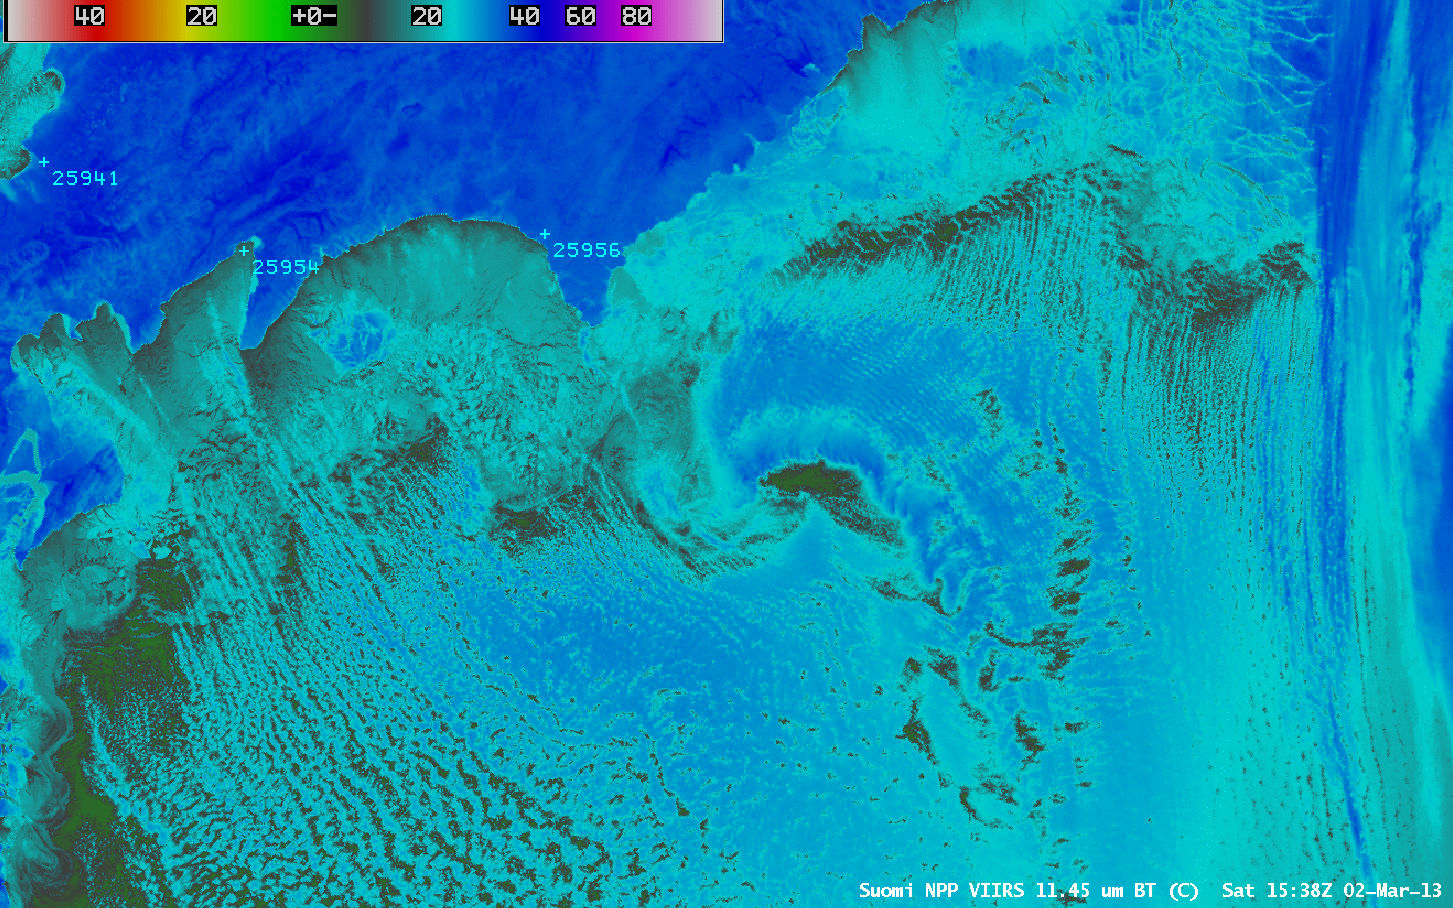 Suomi NPP VIIRS 11.45 Âµm IR channel images